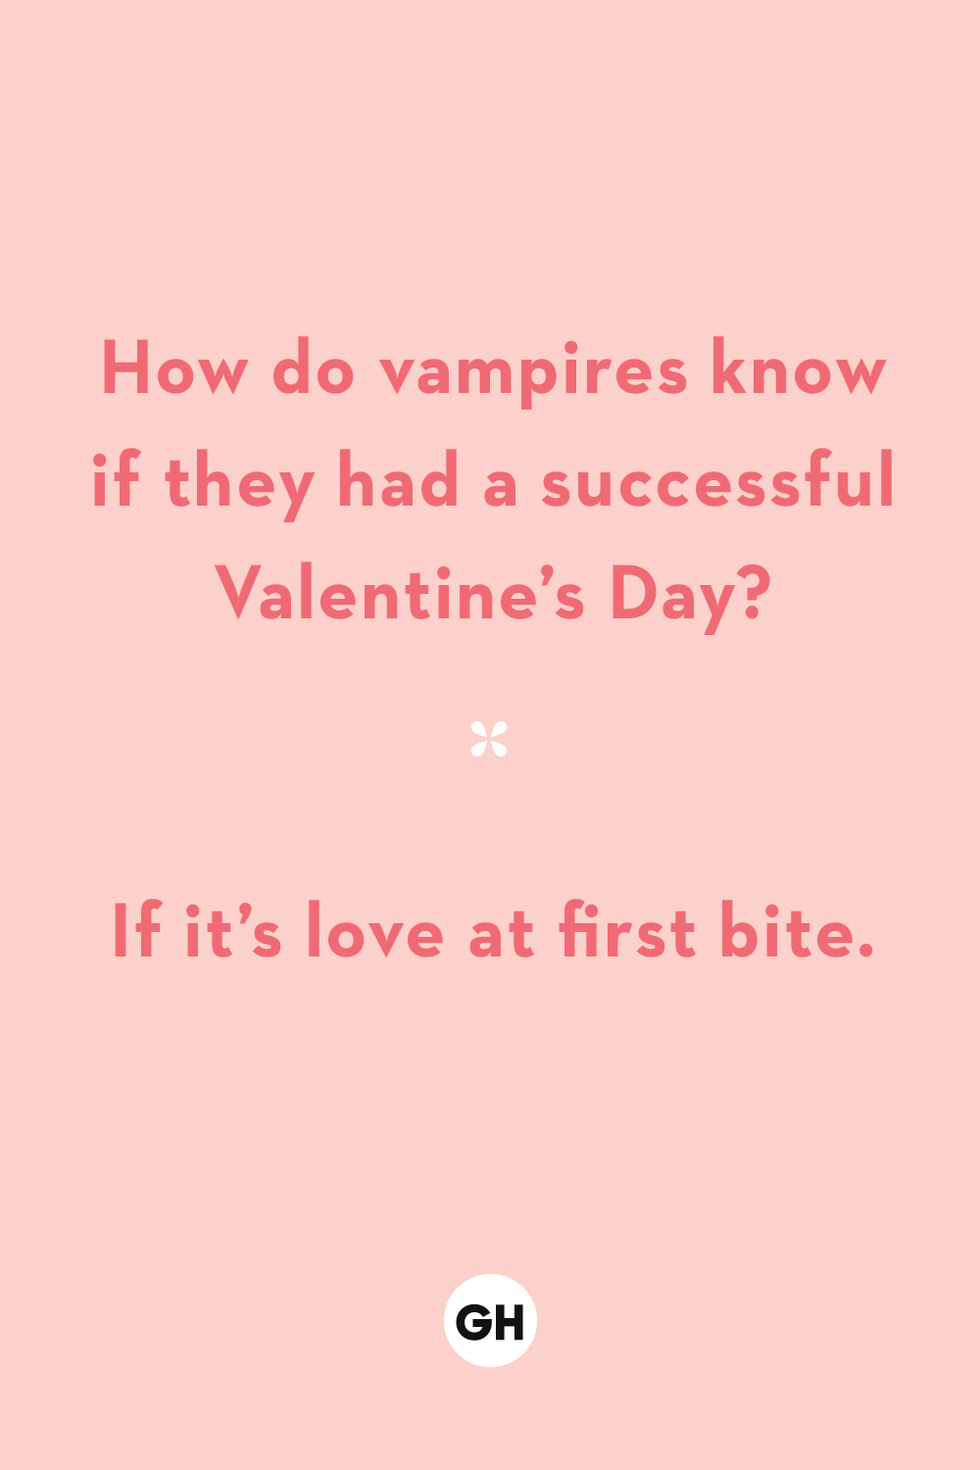 how do vampires know if they had a successful valentine's day if it's love at first bite